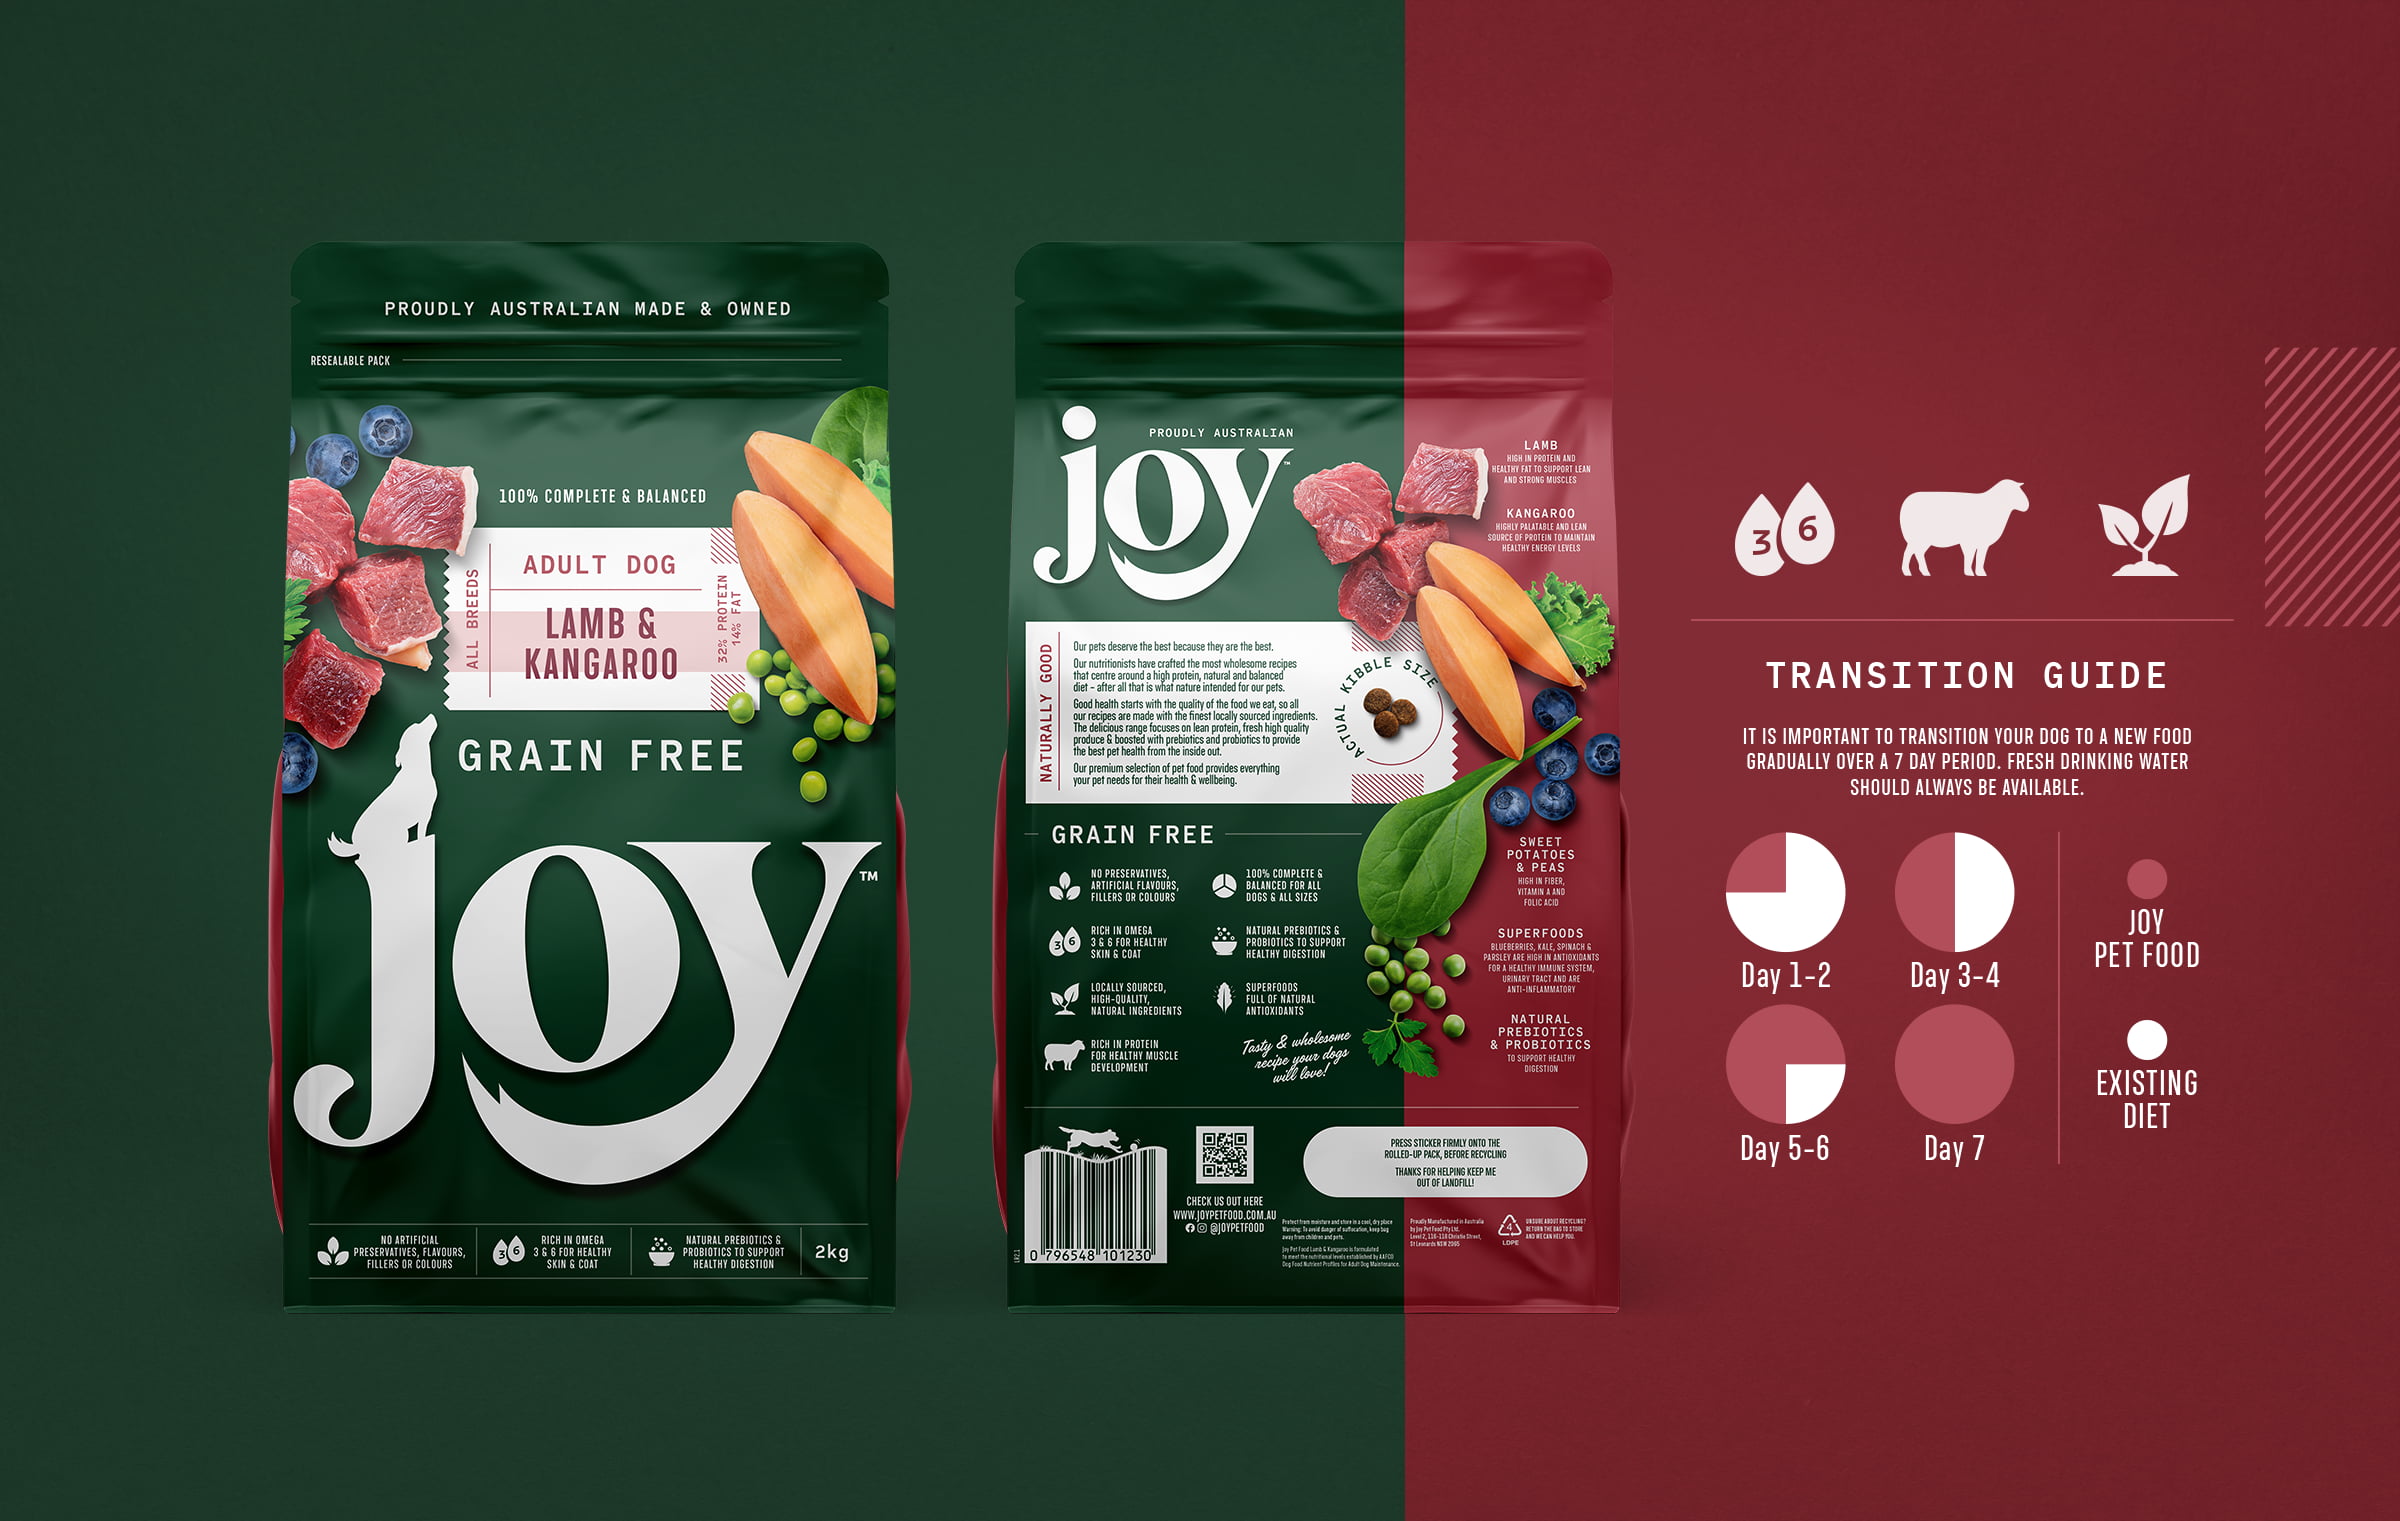 boxer-and-co-australian-design-studio-sydney-brand-packaging-redesign-puppy-cat-food-nutritious-grain-free-transition-guide-green-playful